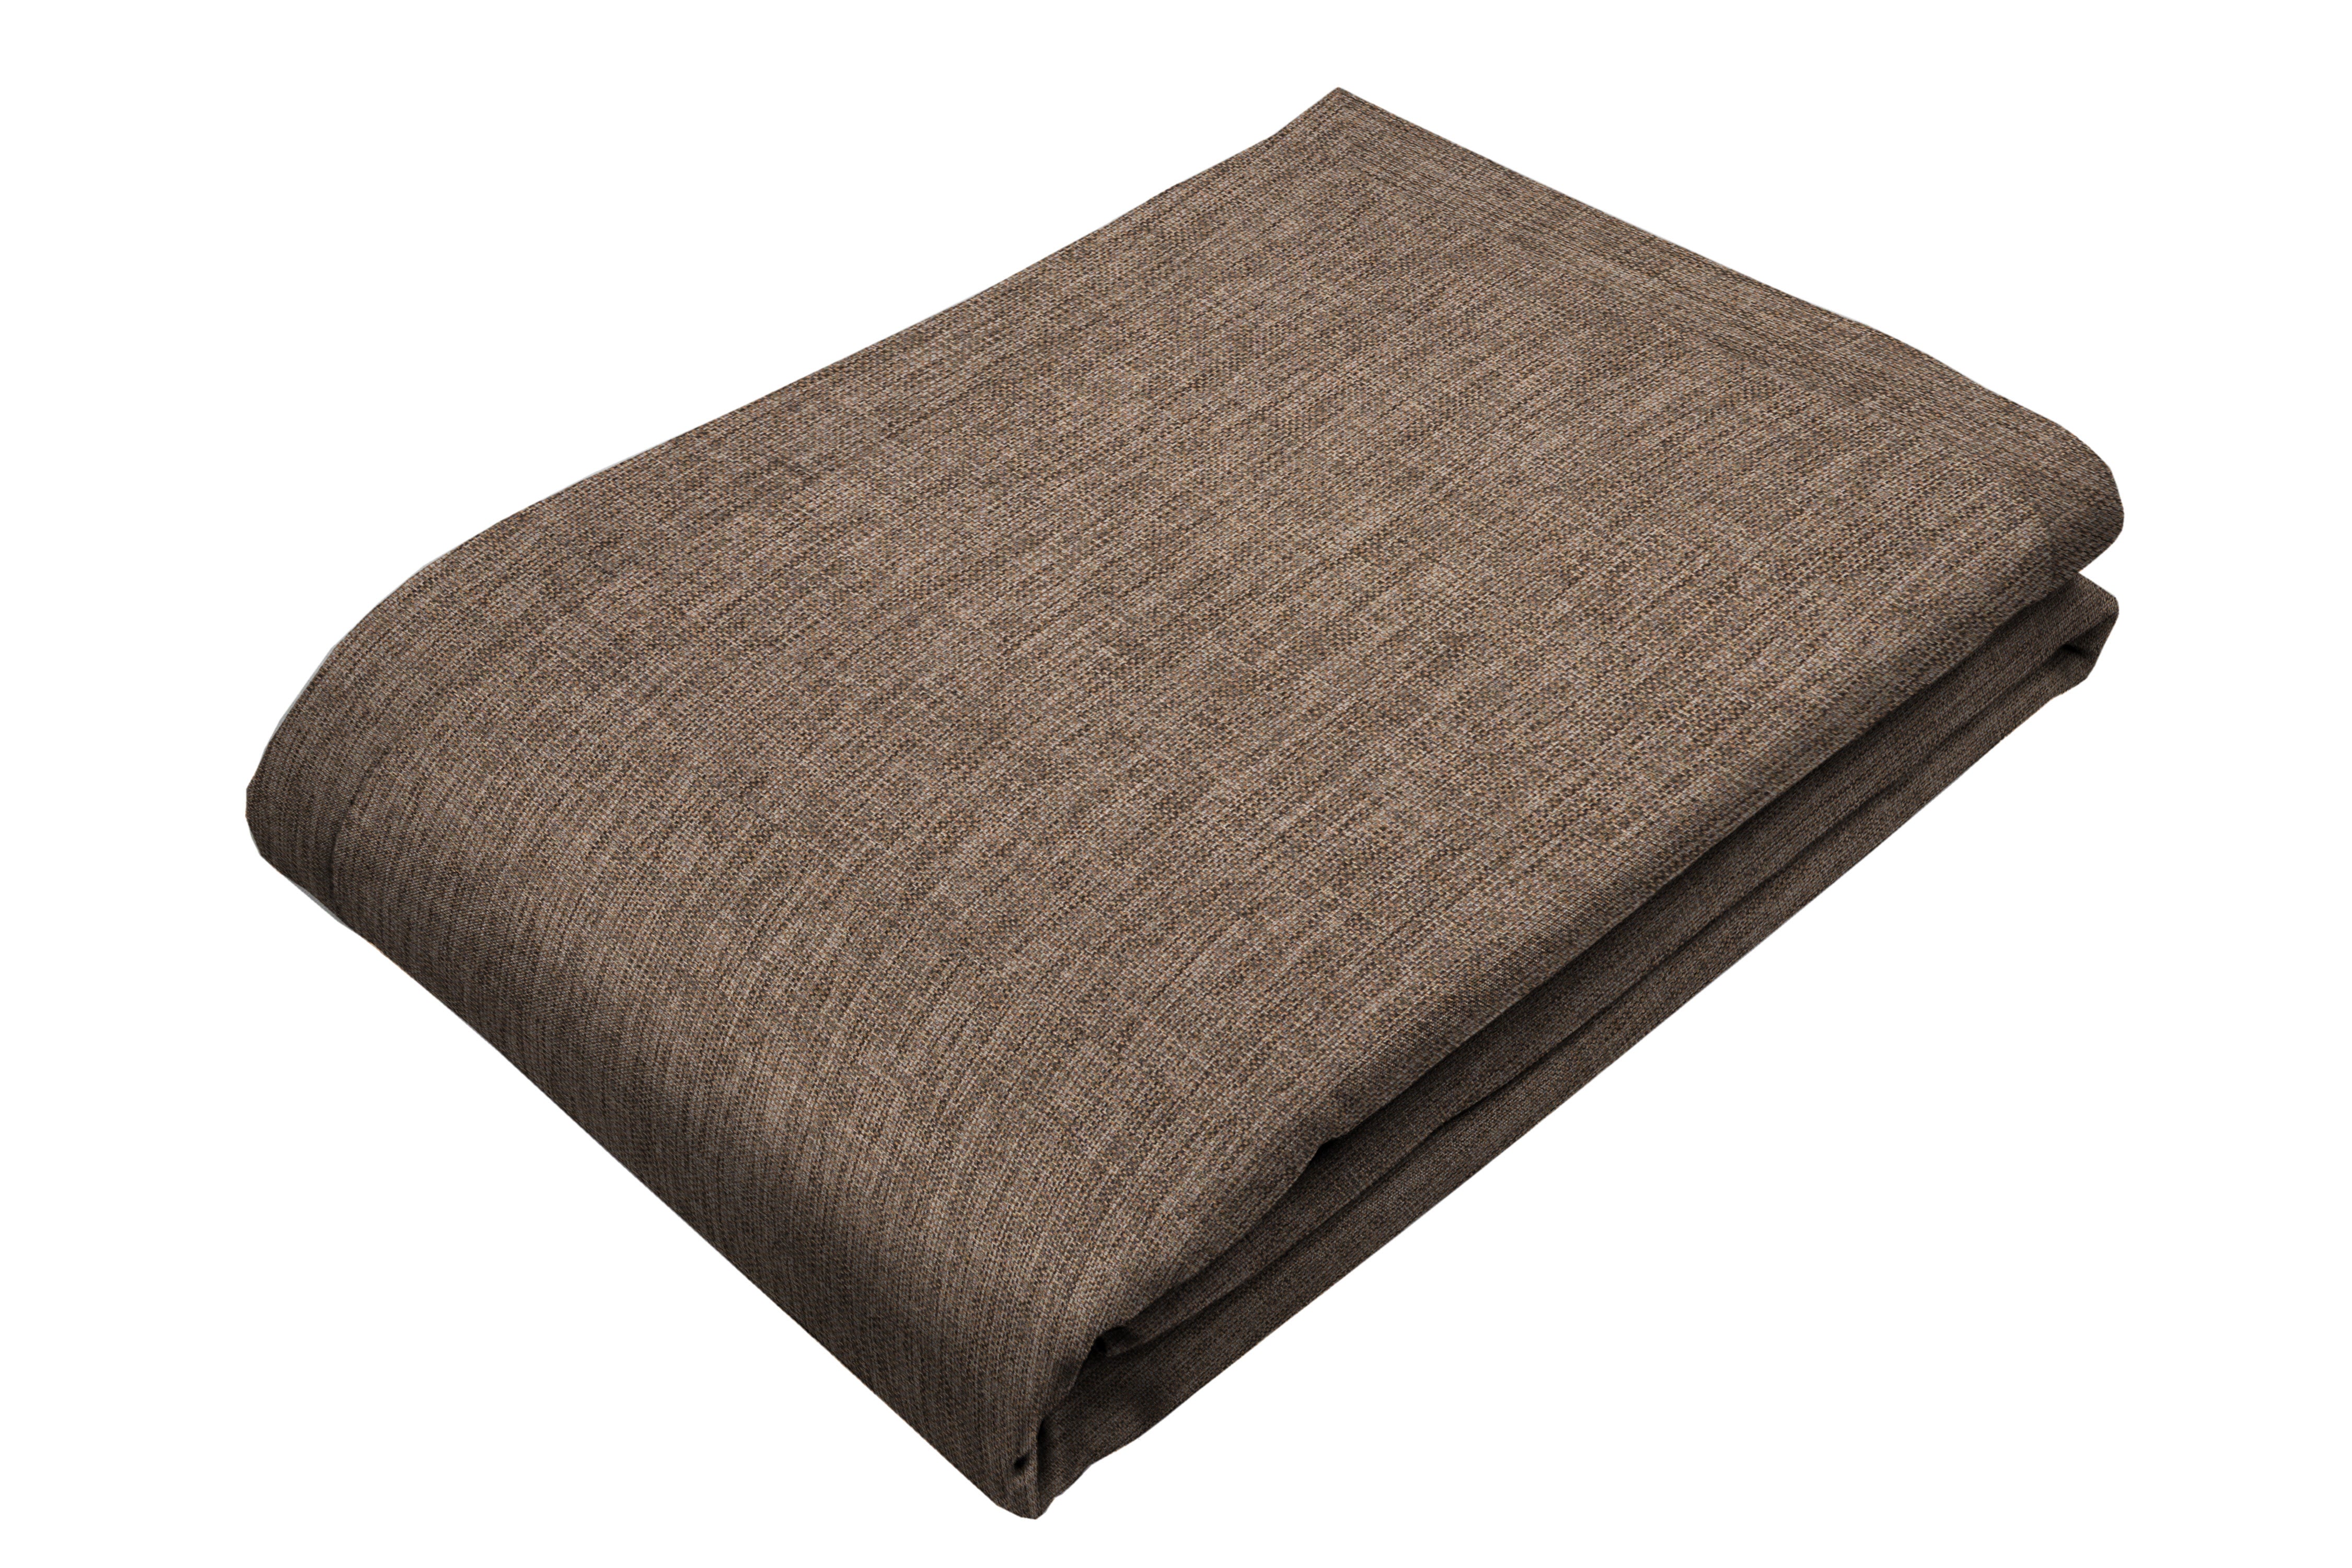 Albany Chocolate Brown Bed Runners